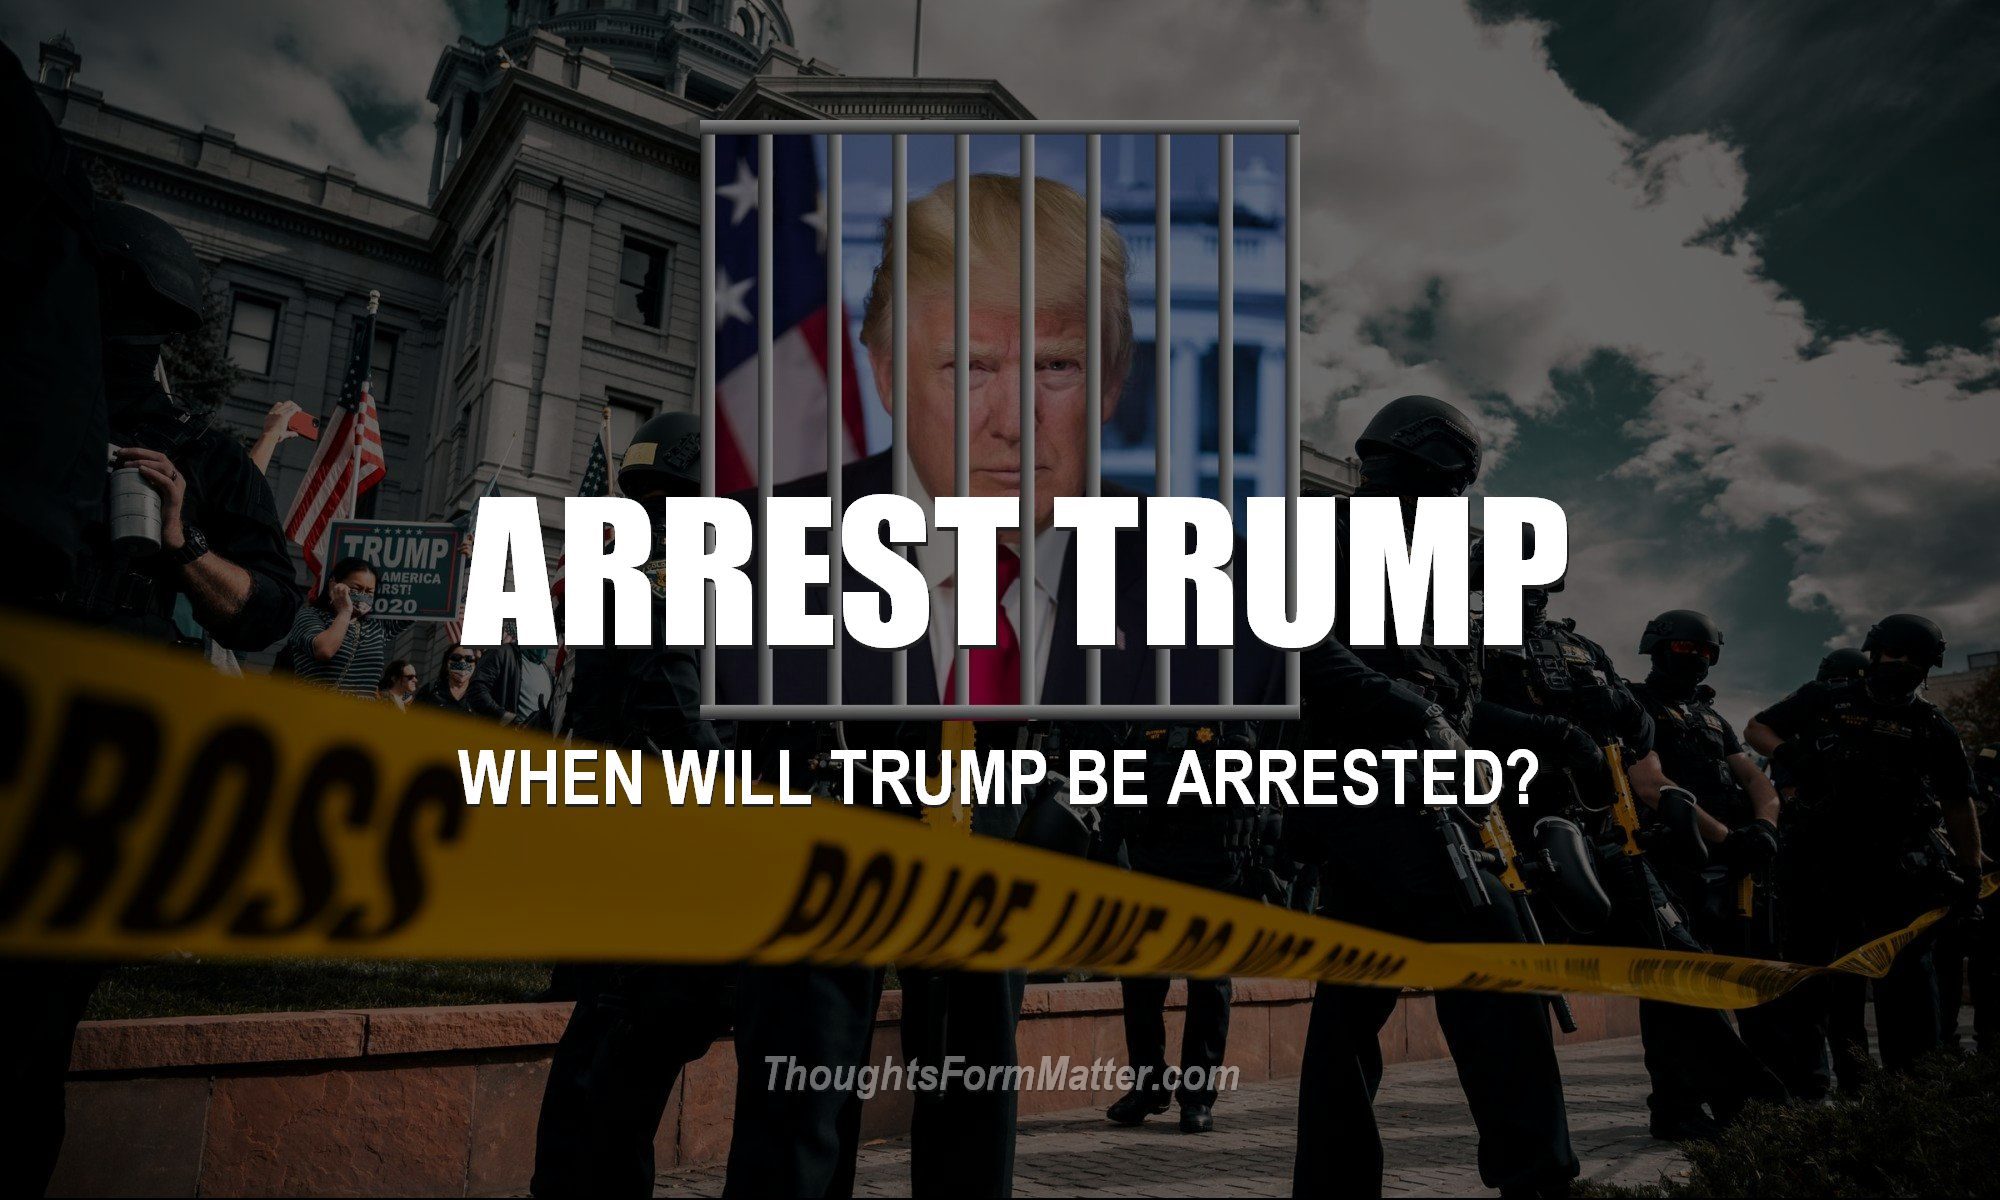 When will Trump be indicted, arrested and sent to prison. Why is it taking so long to charge and arrest Trump?